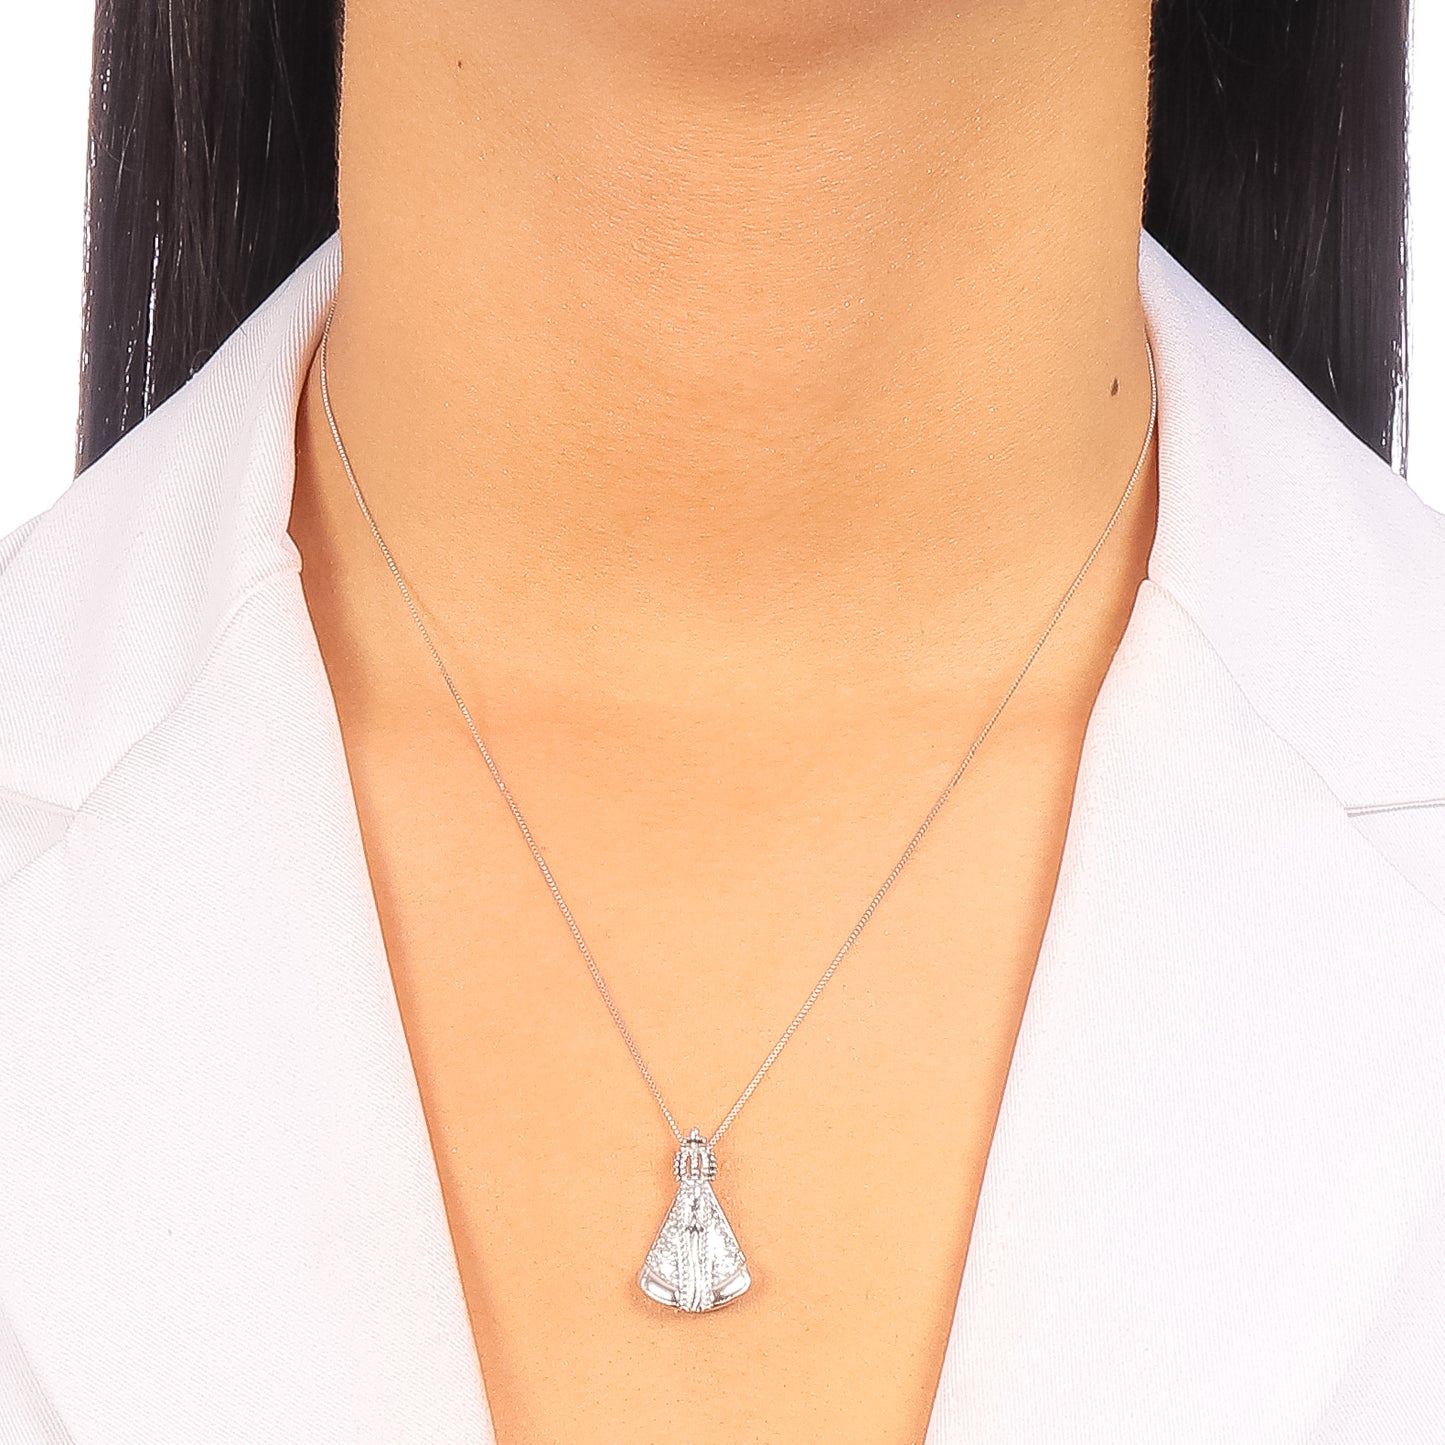 Our Lady necklace